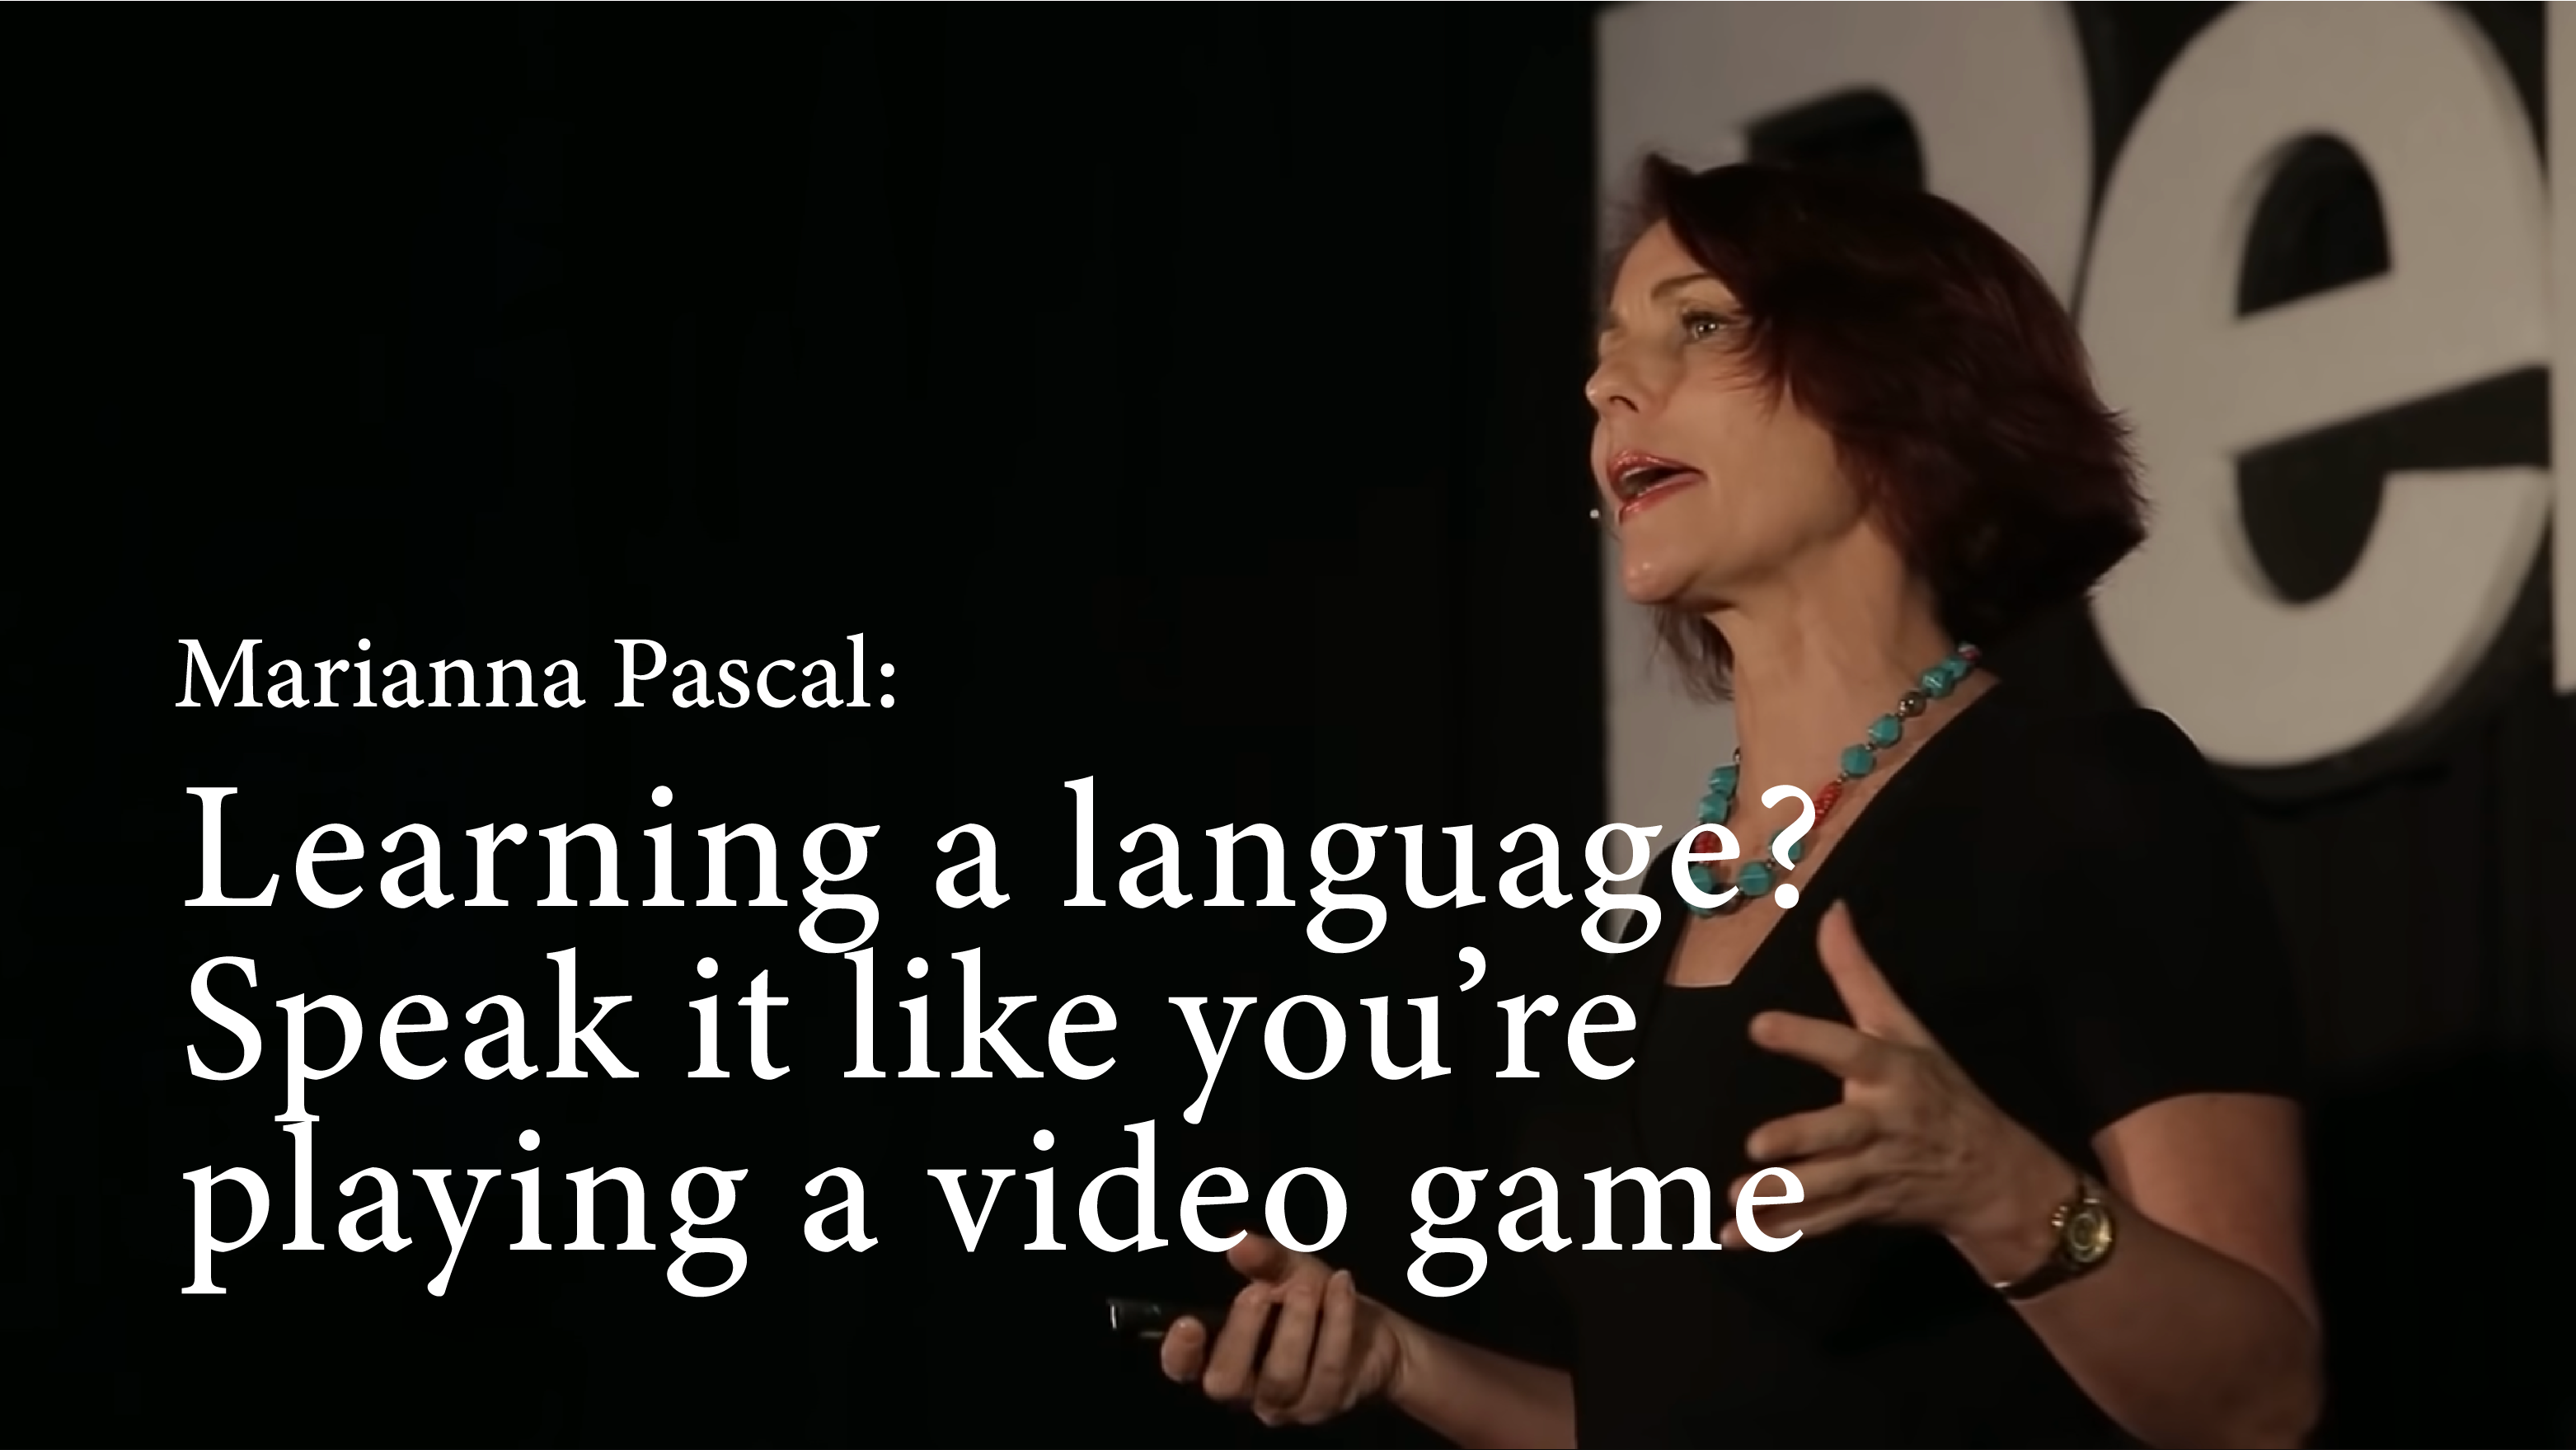 [C+] Learning a Language? Speak it Like You’re Playing a Video Game [PRACTICE]